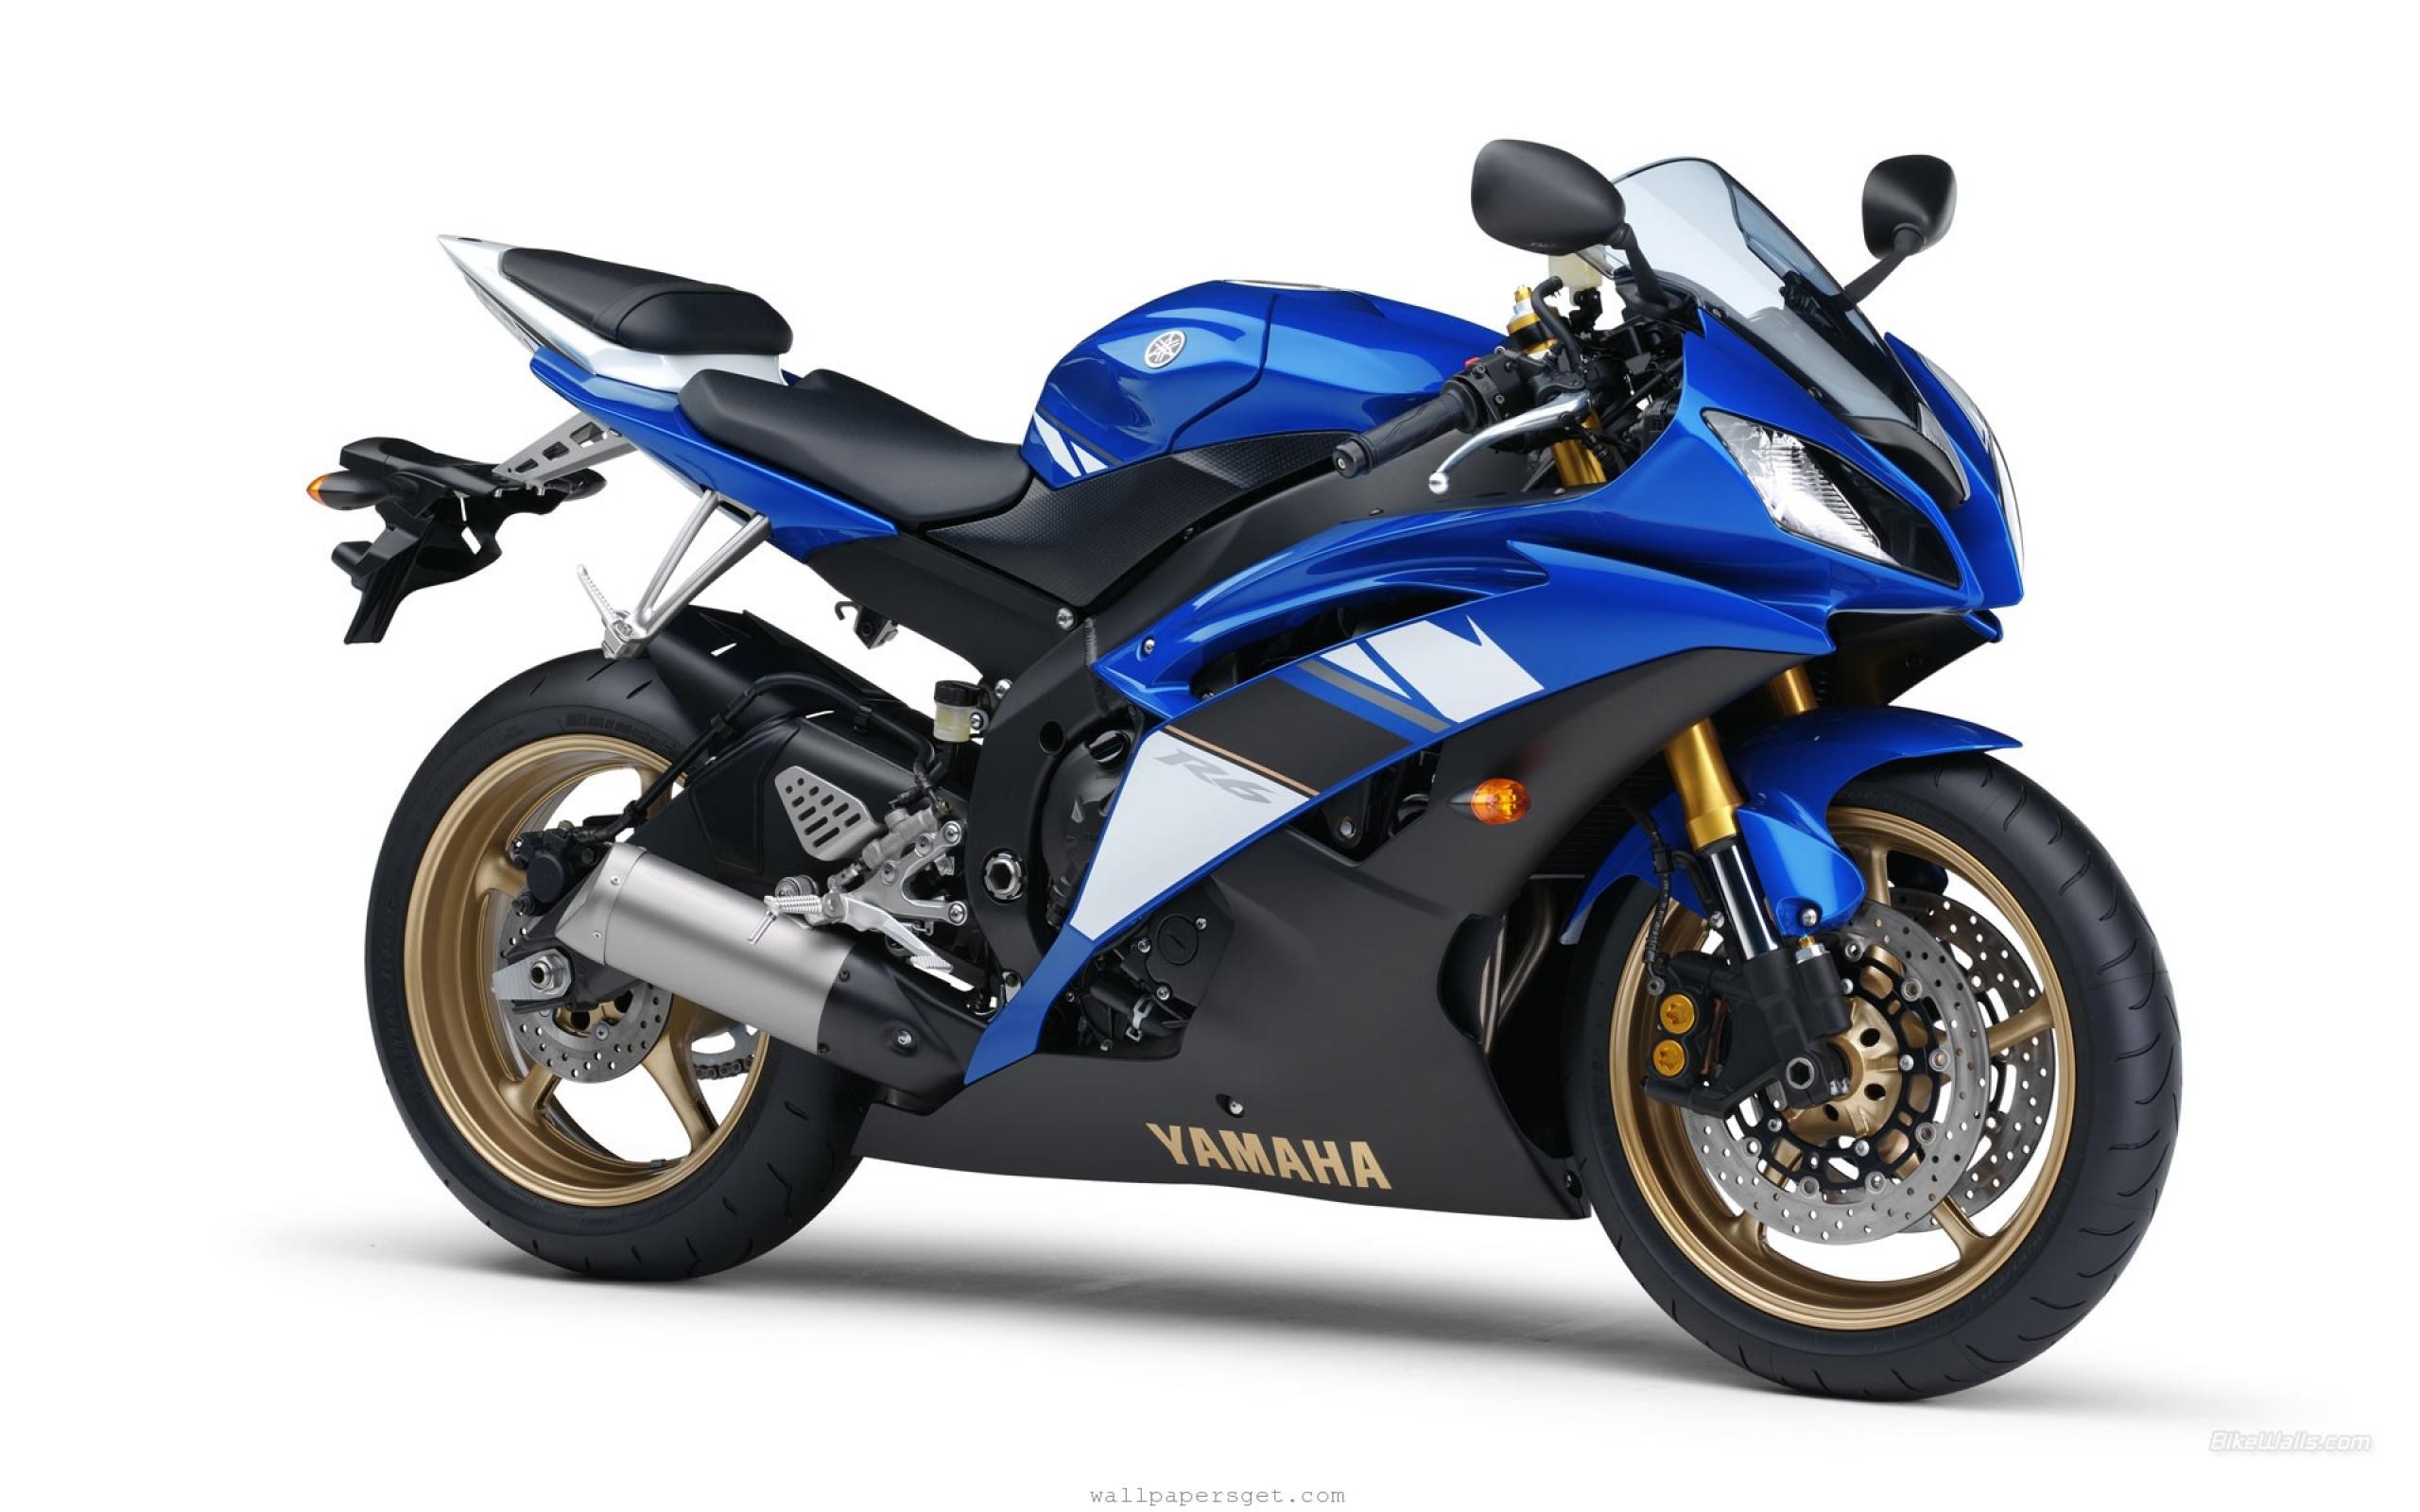 General 2560x1600 Yamaha motorcycle simple background white background Blue Motorcycles vehicle Japanese motorcycles